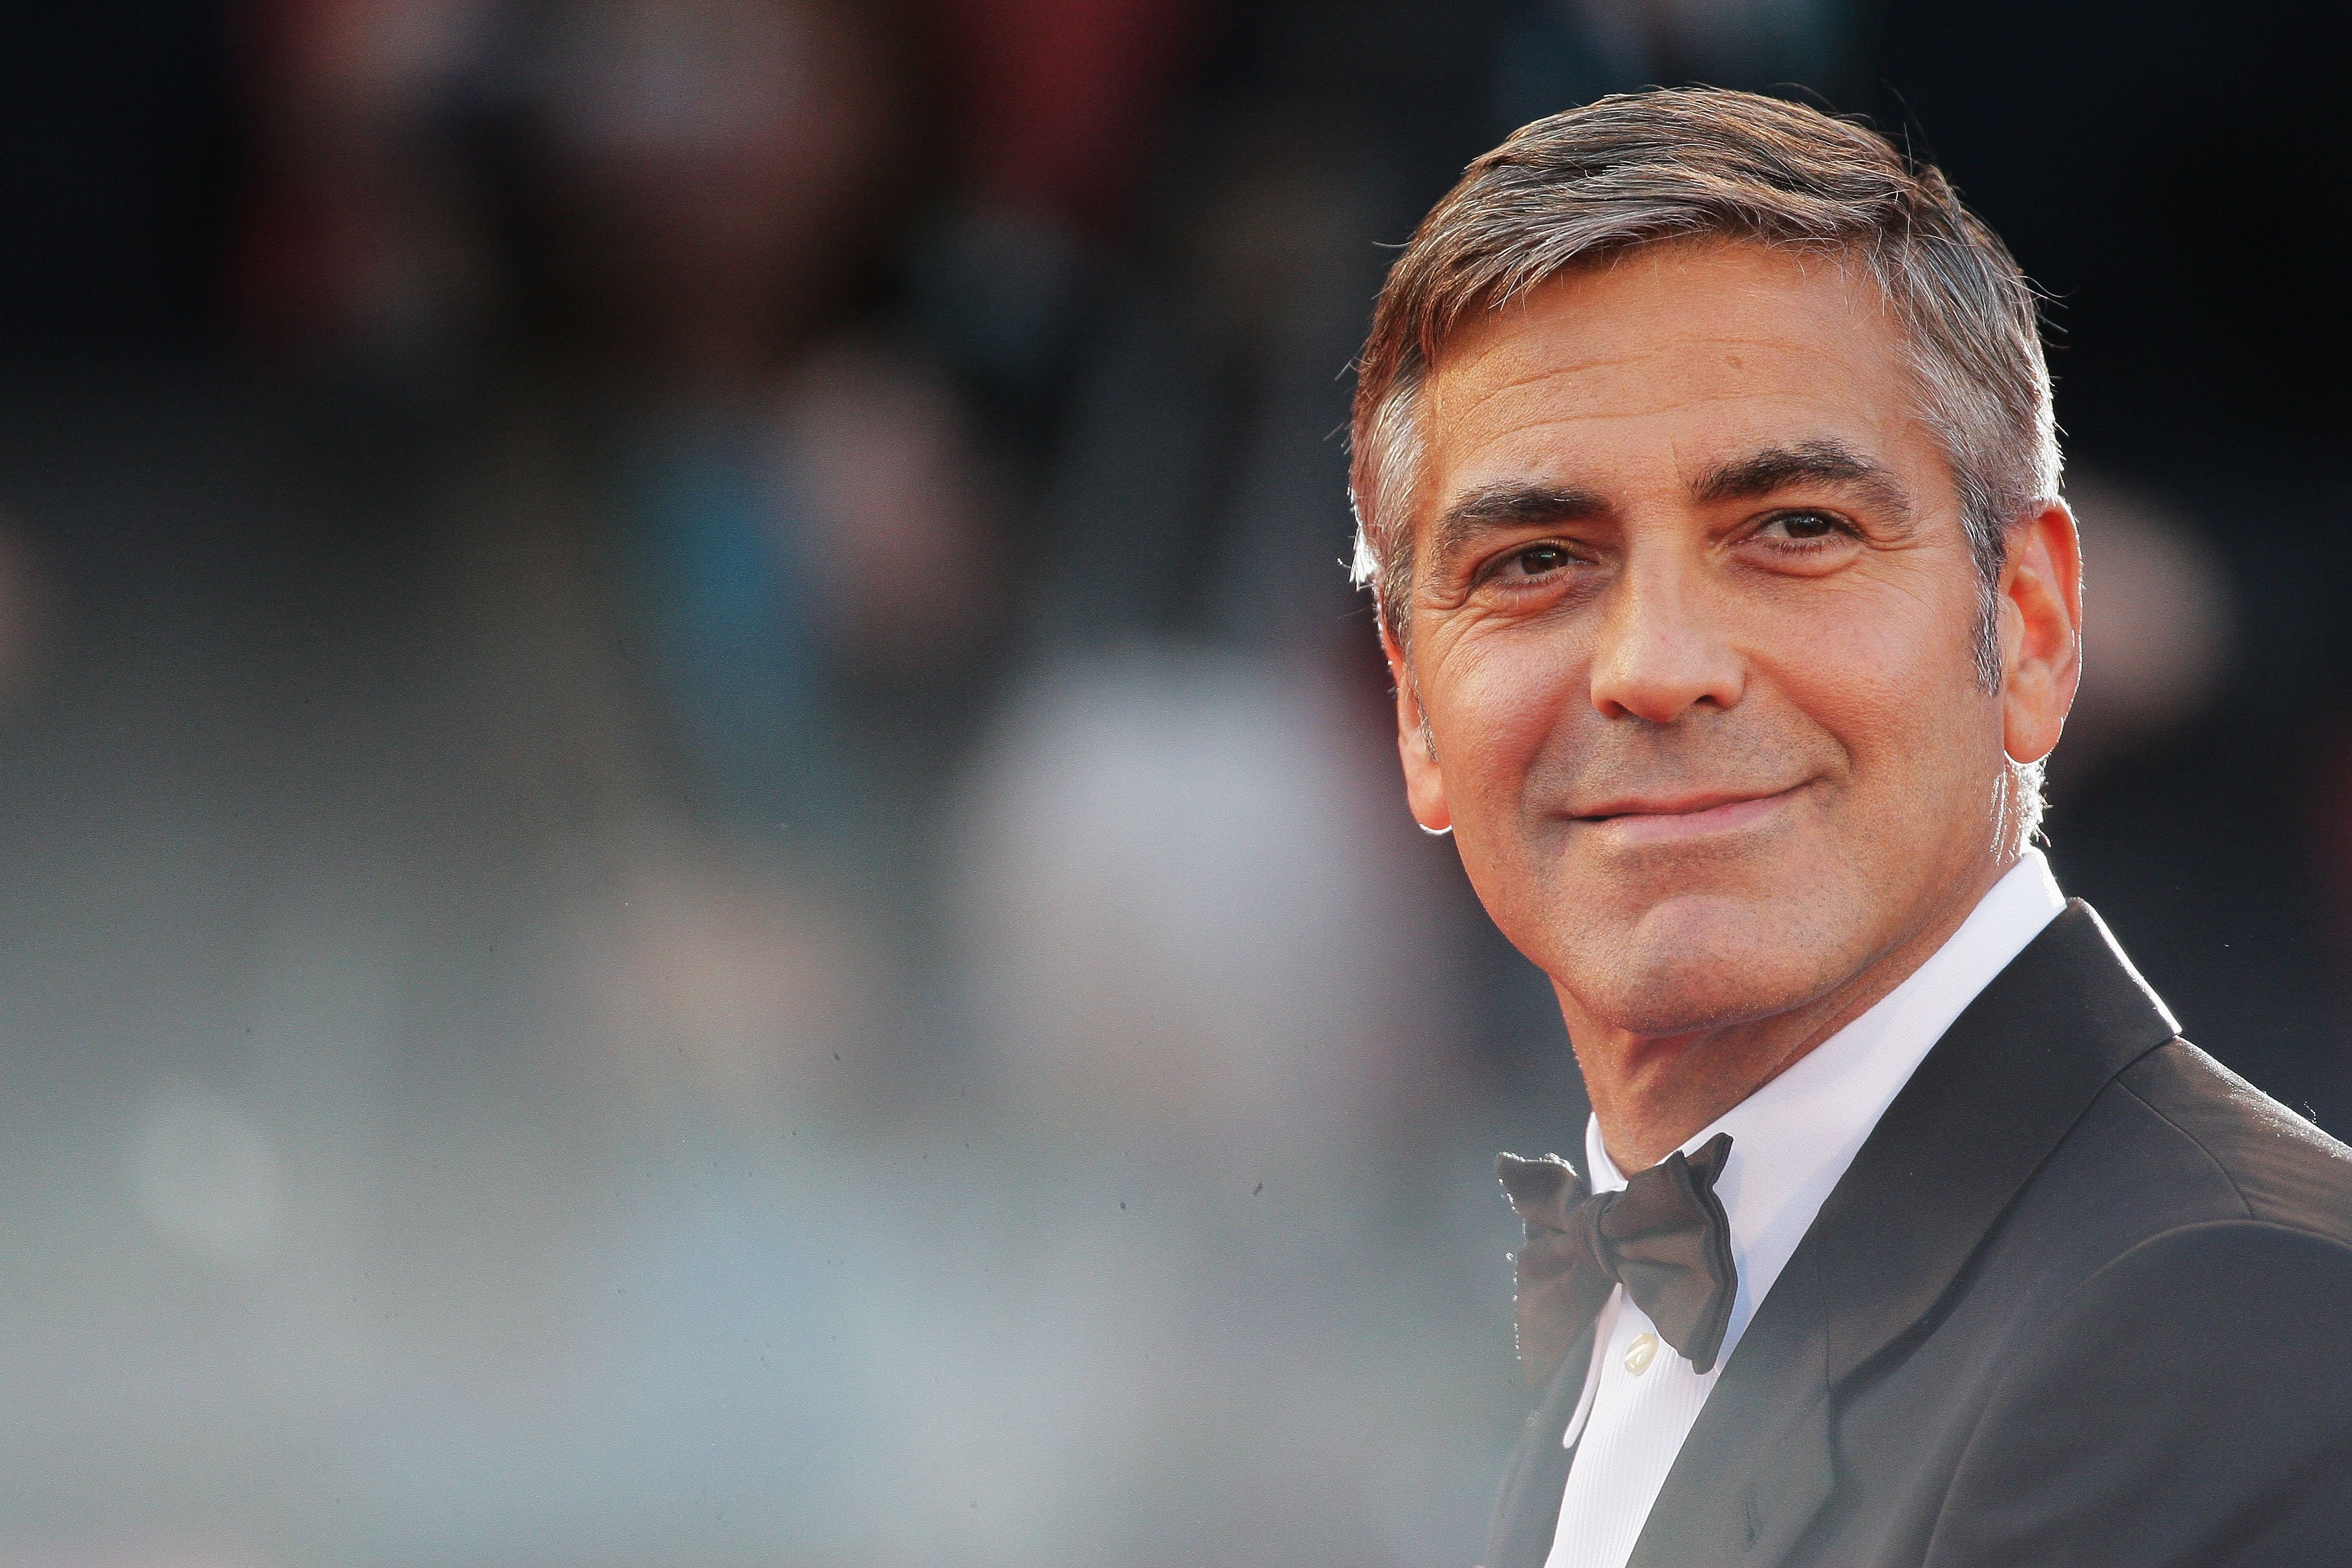 George Clooney attends "The Men Who Stare At Goats" premiere at the Sala Grande during the 66th Venice Film Festival on September 8, 2009, in Venice, Italy. Source: Getty Images.